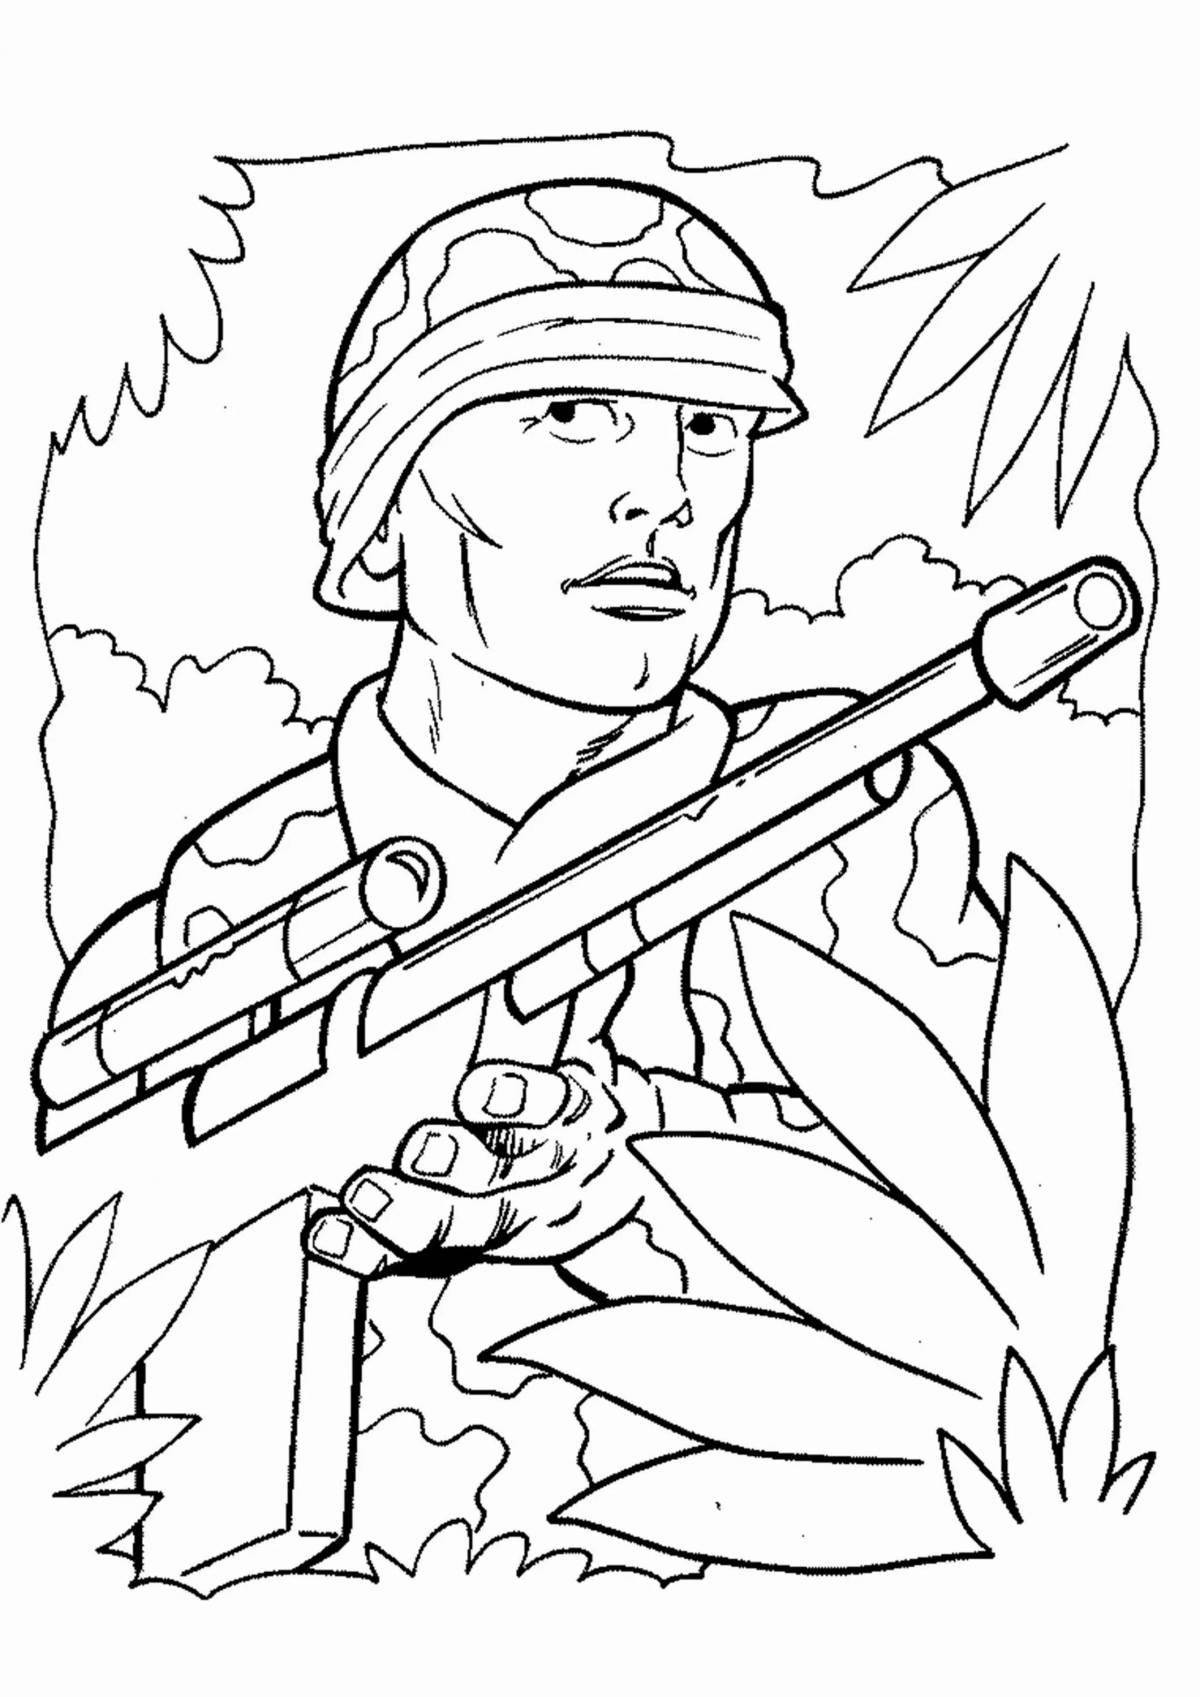 Animated coloring day of the defender of the fatherland